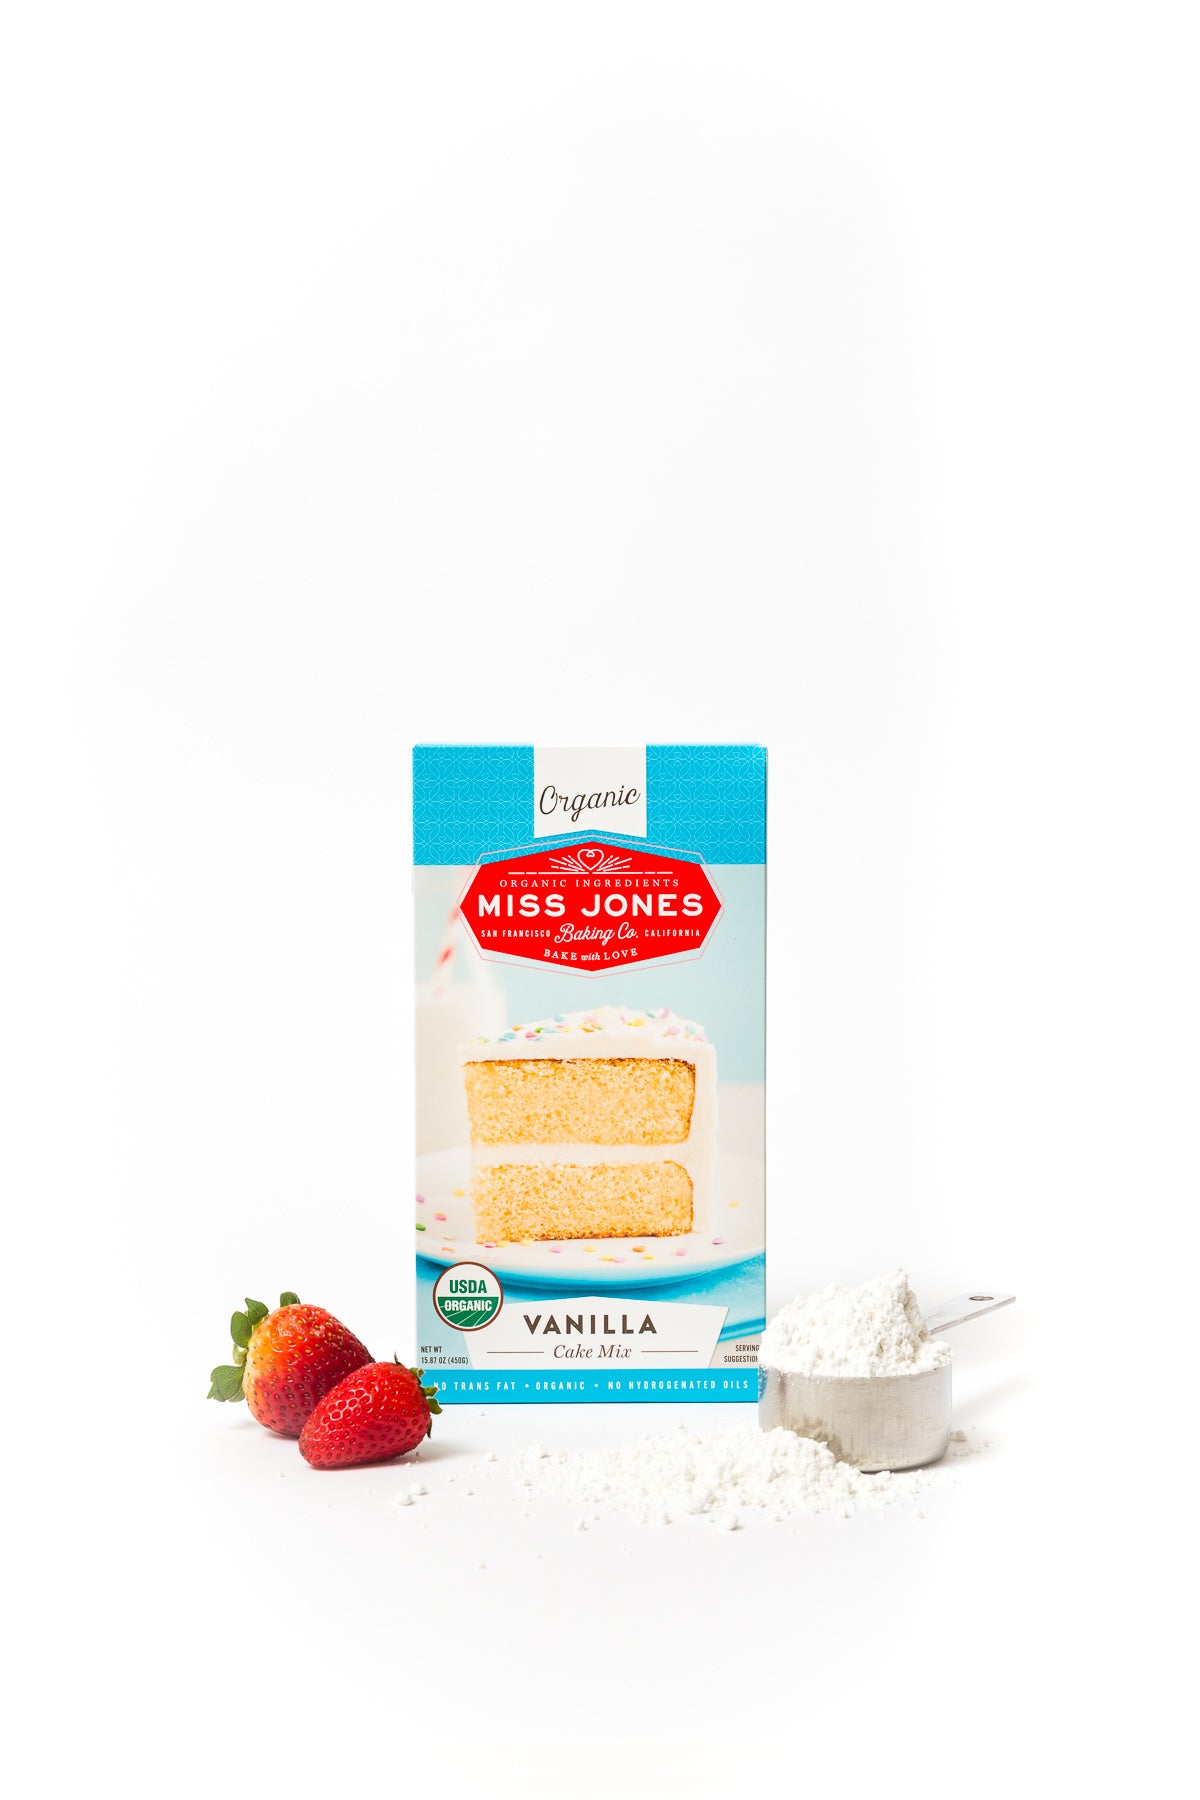 A box of Miss Jones Vanilla Cake Mix next to strawberries and a measuring cup of cake mix for Miss Jones Baking Co Strawberry Buttermilk Donuts recipe